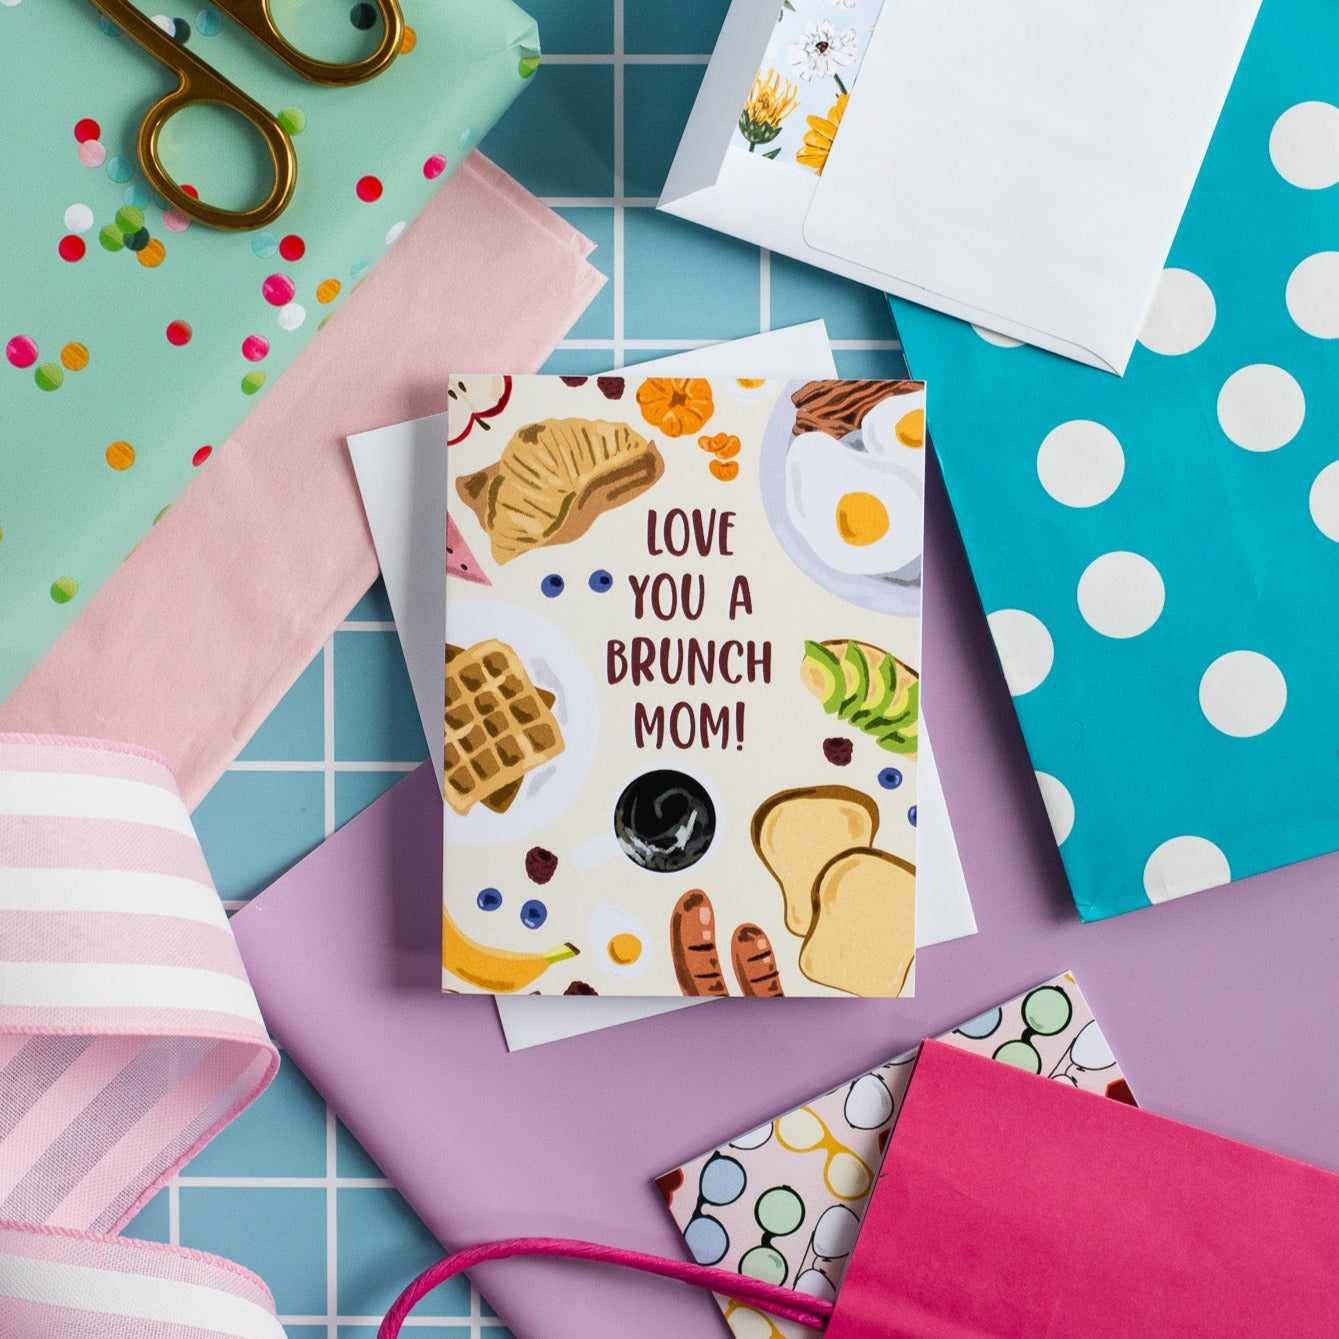 Love You A Brunch Mom! - Greeting Card